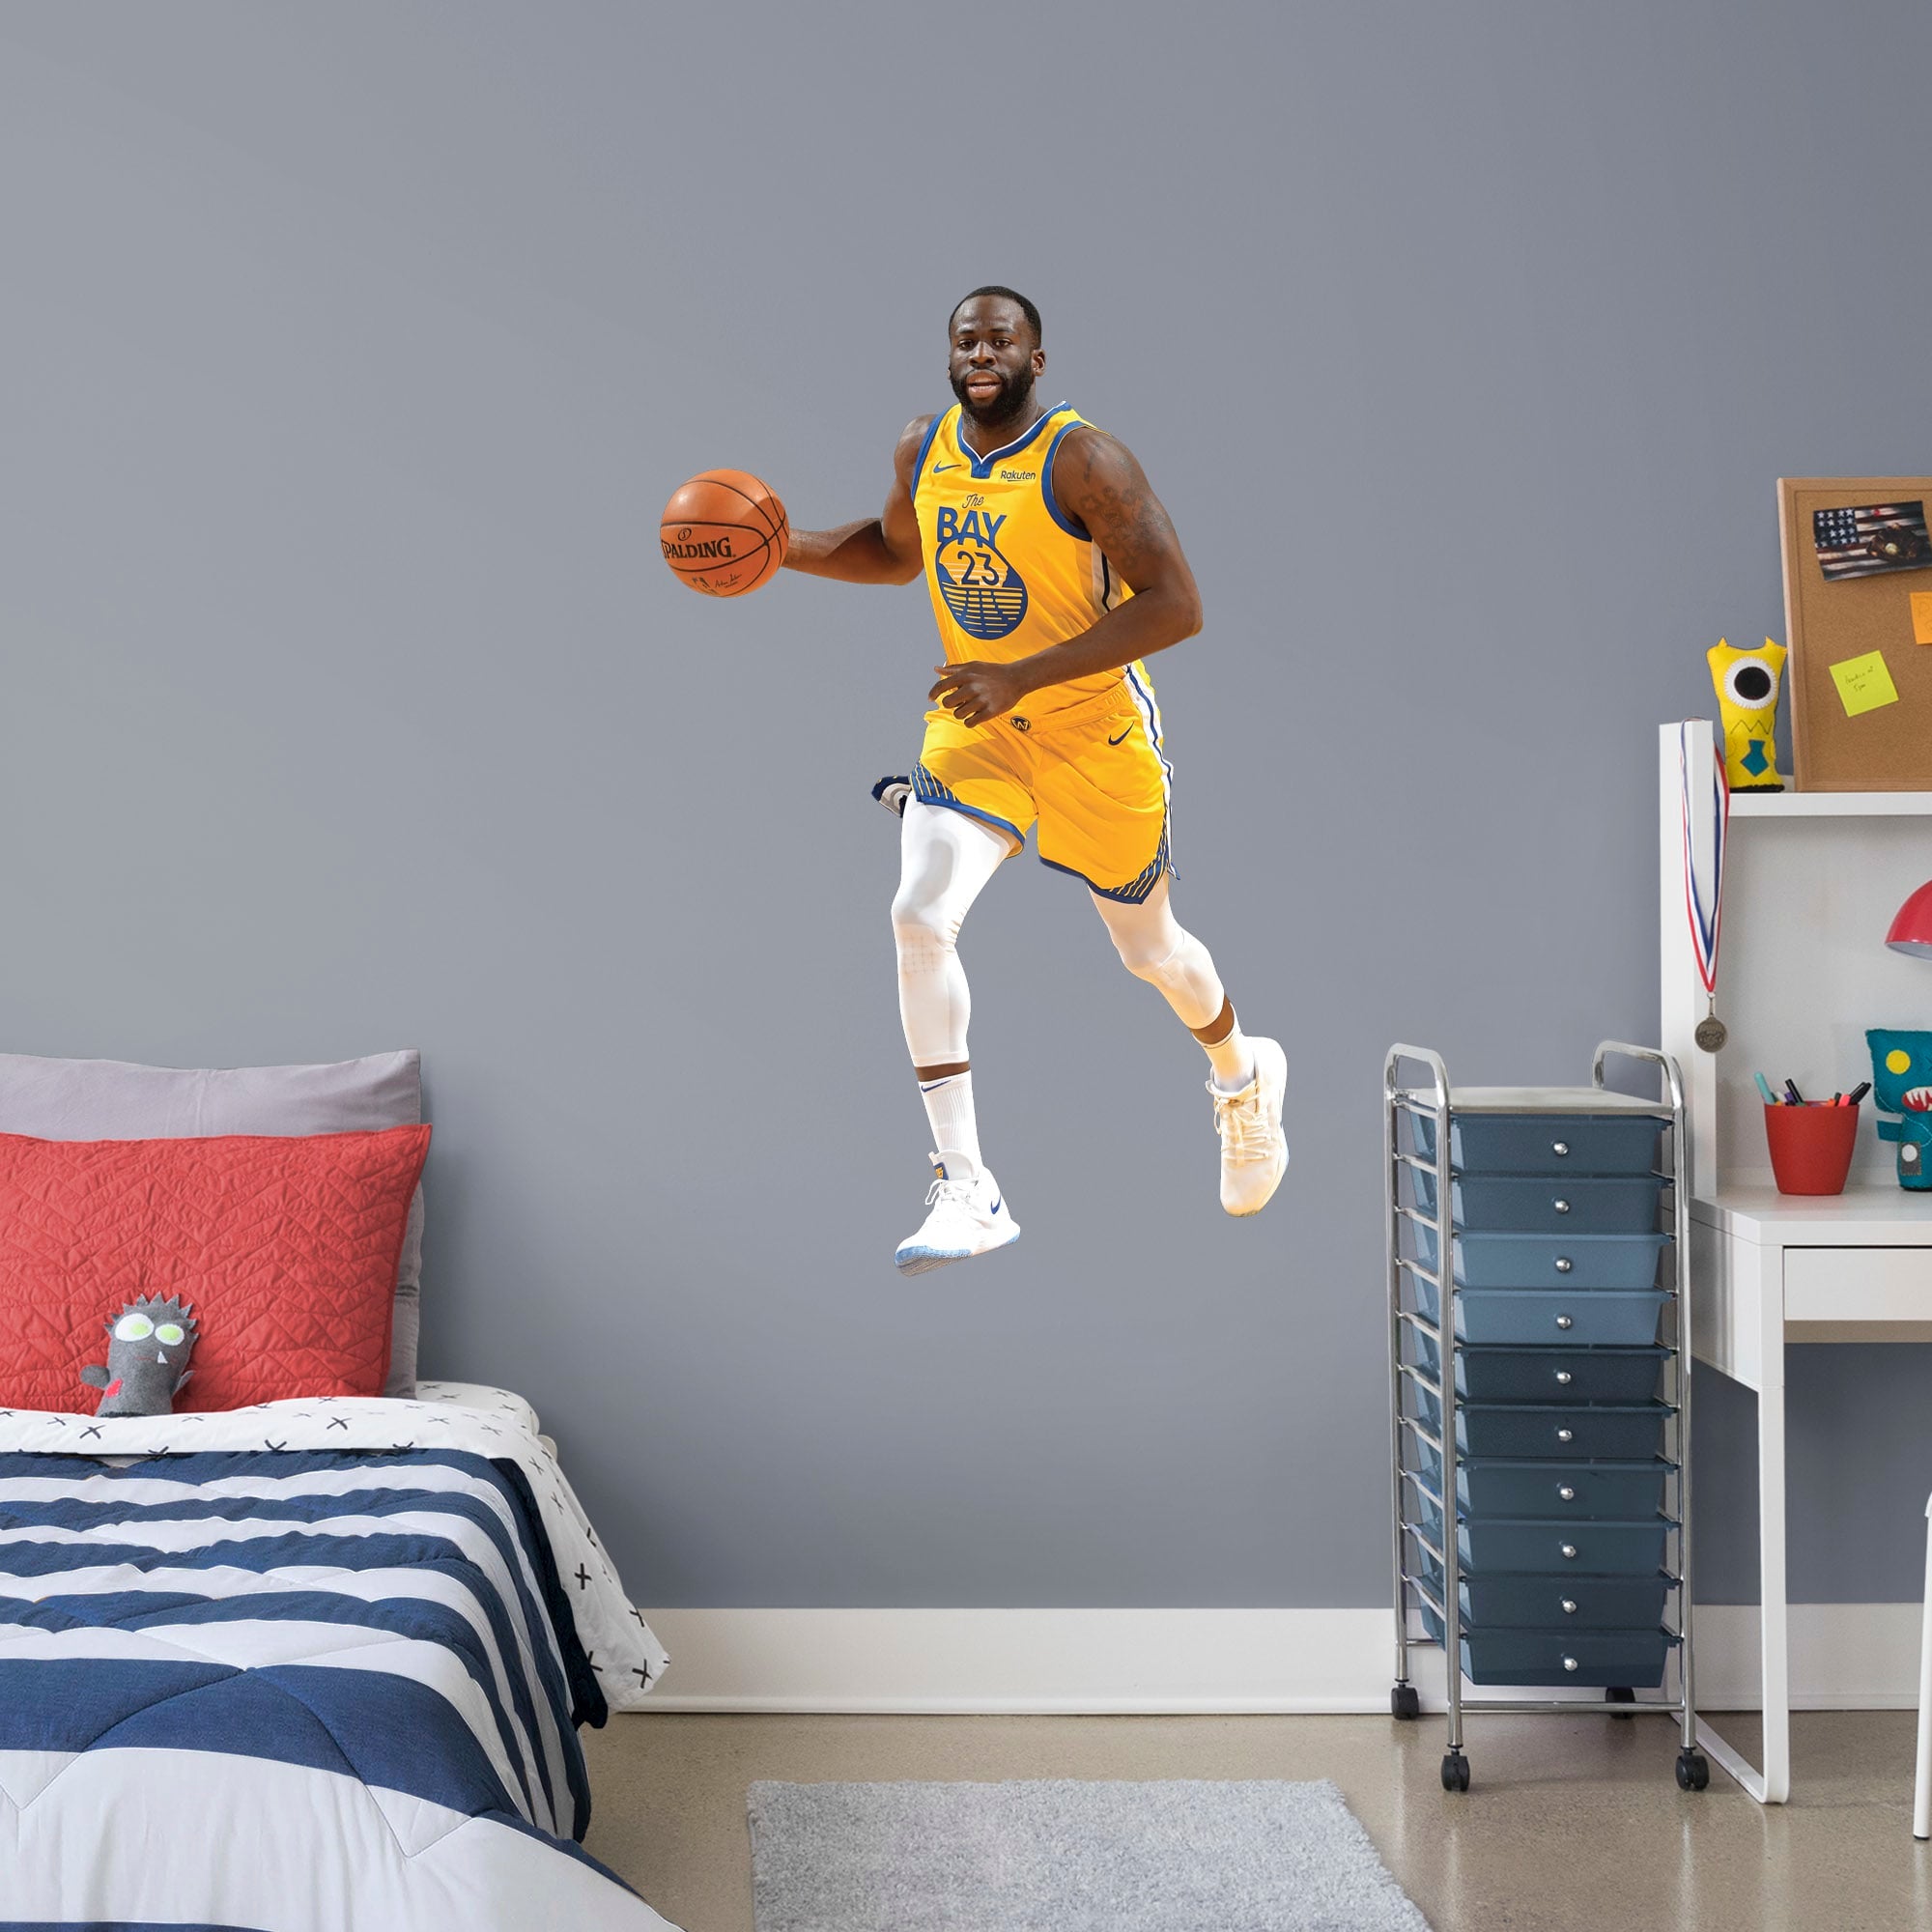 Draymond Green for Golden State Warriors - Officially Licensed NBA Removable Wall Decal Giant Athlete + 2 Decals (32"W x 51"H) b